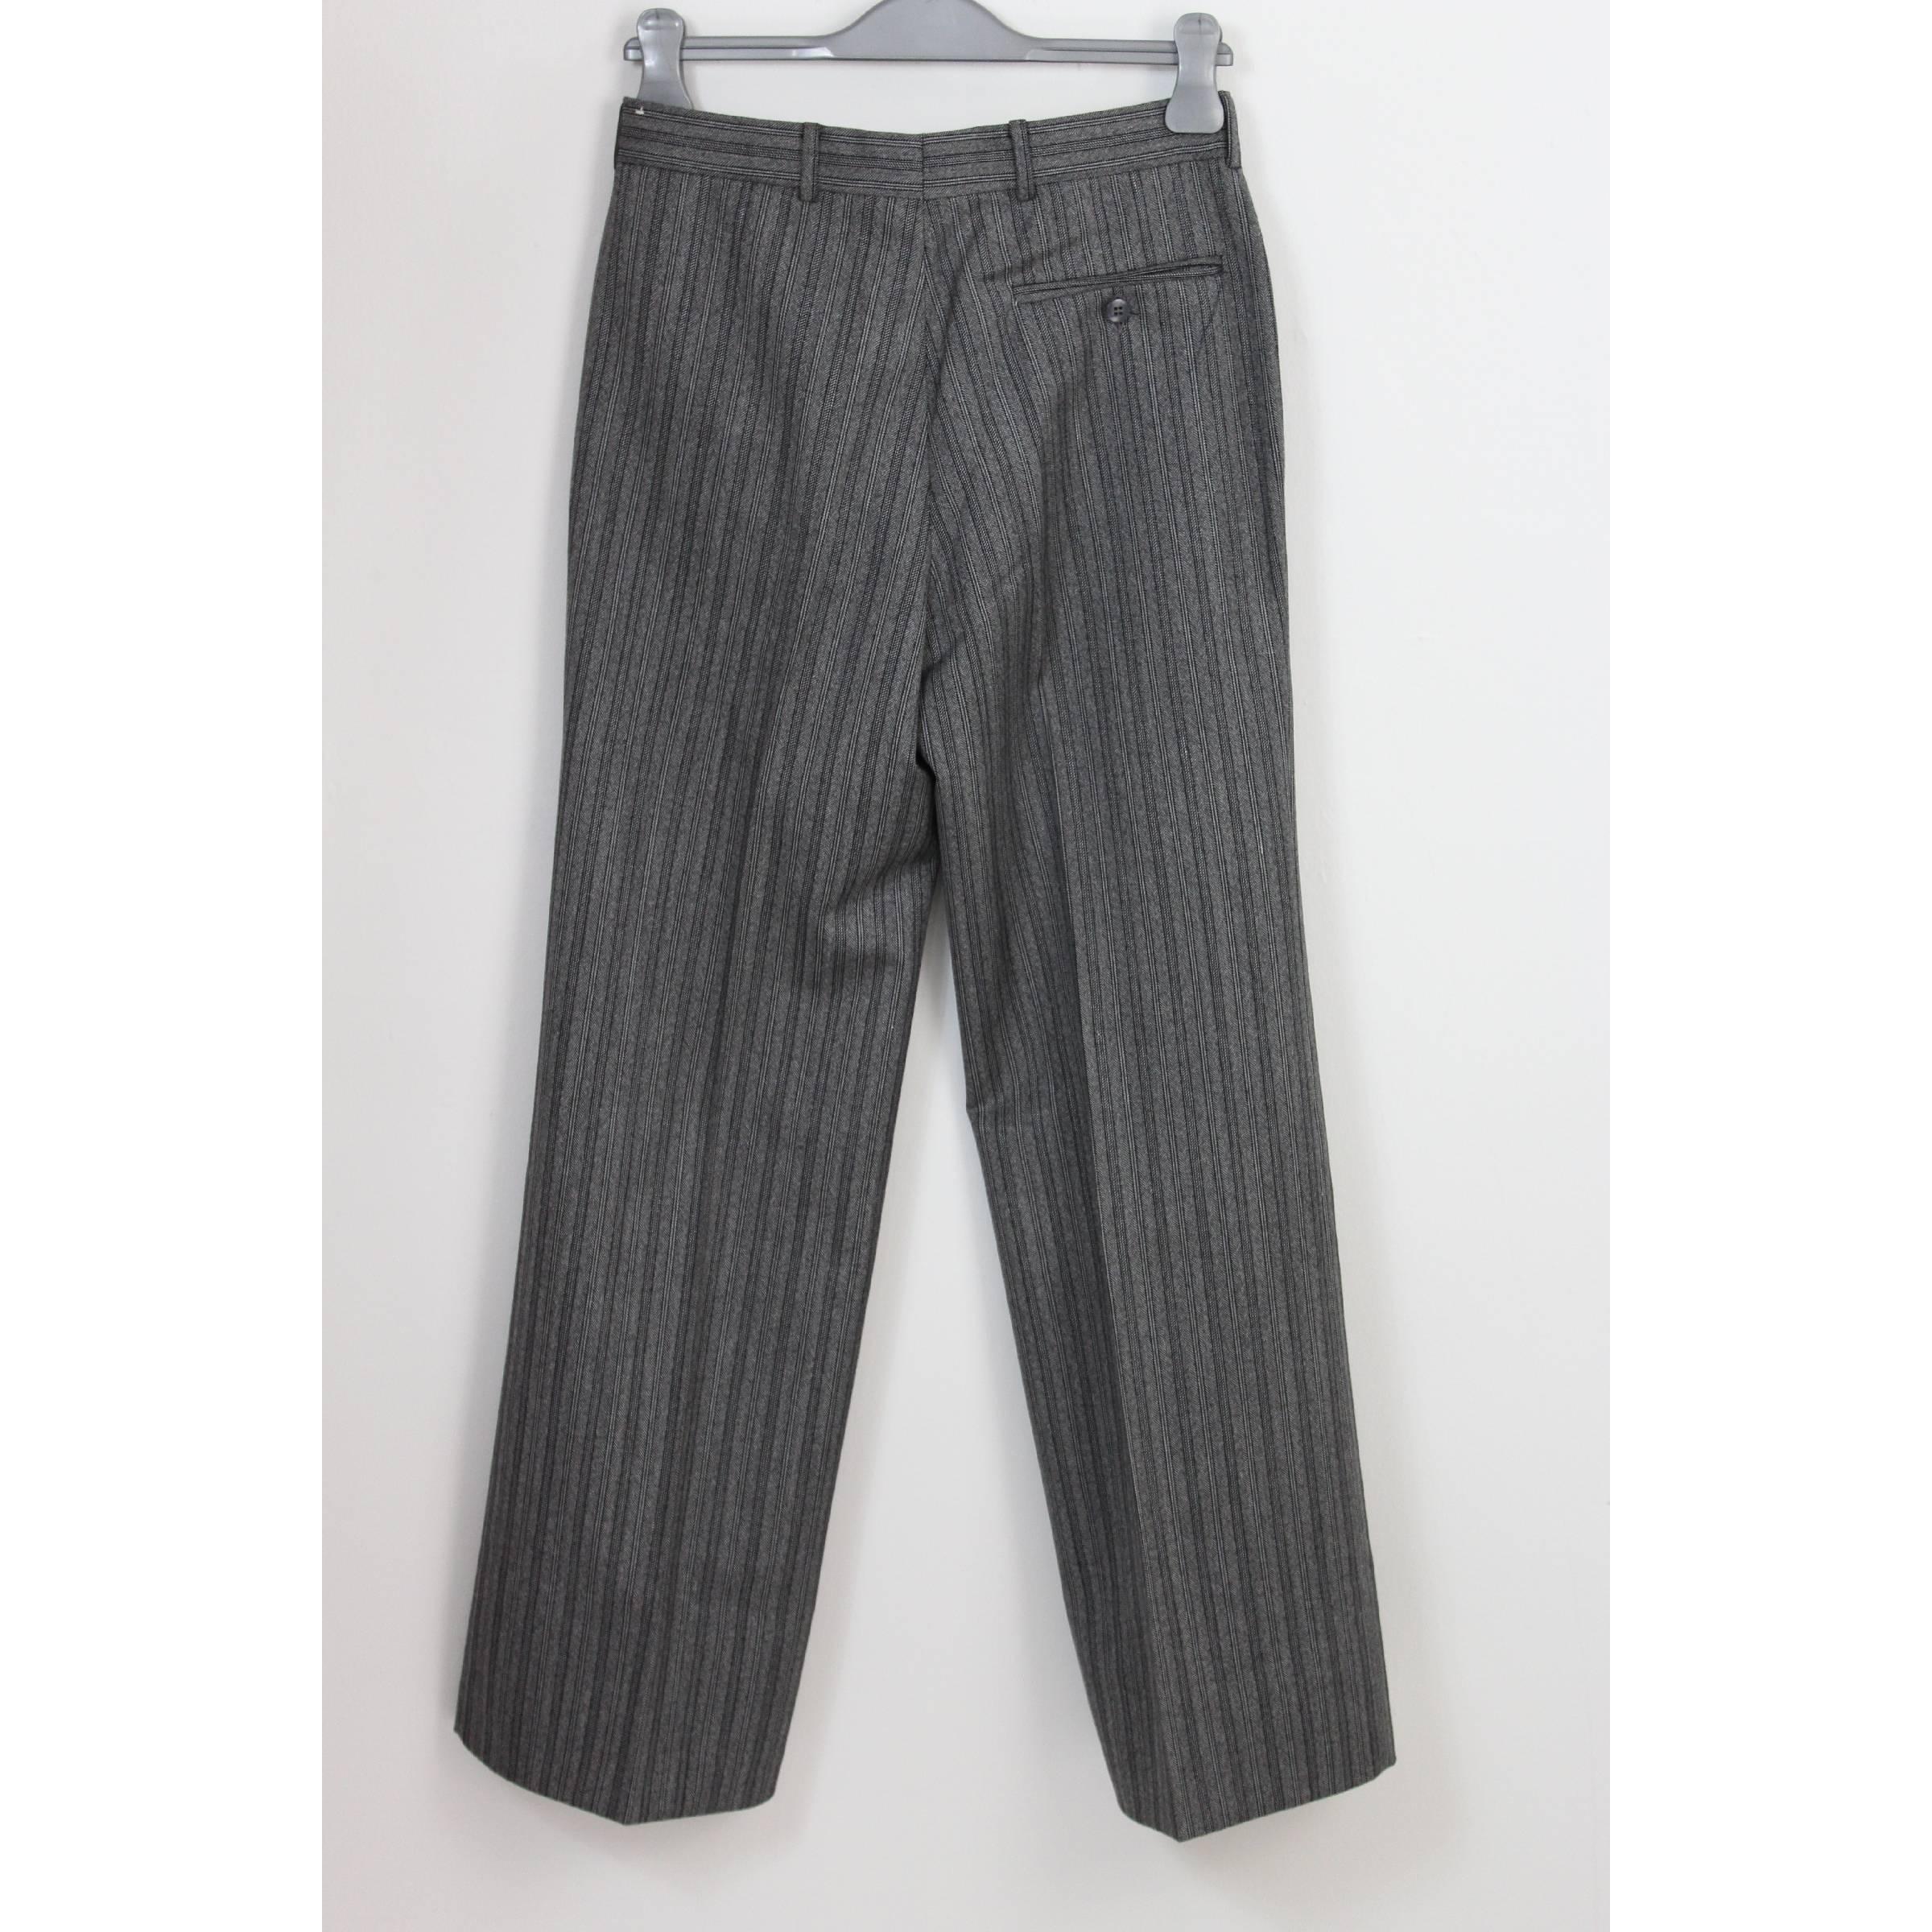 Pierre Cardin Suit Pants Gray and Black Wool France Smoking, 1990s  For Sale 2